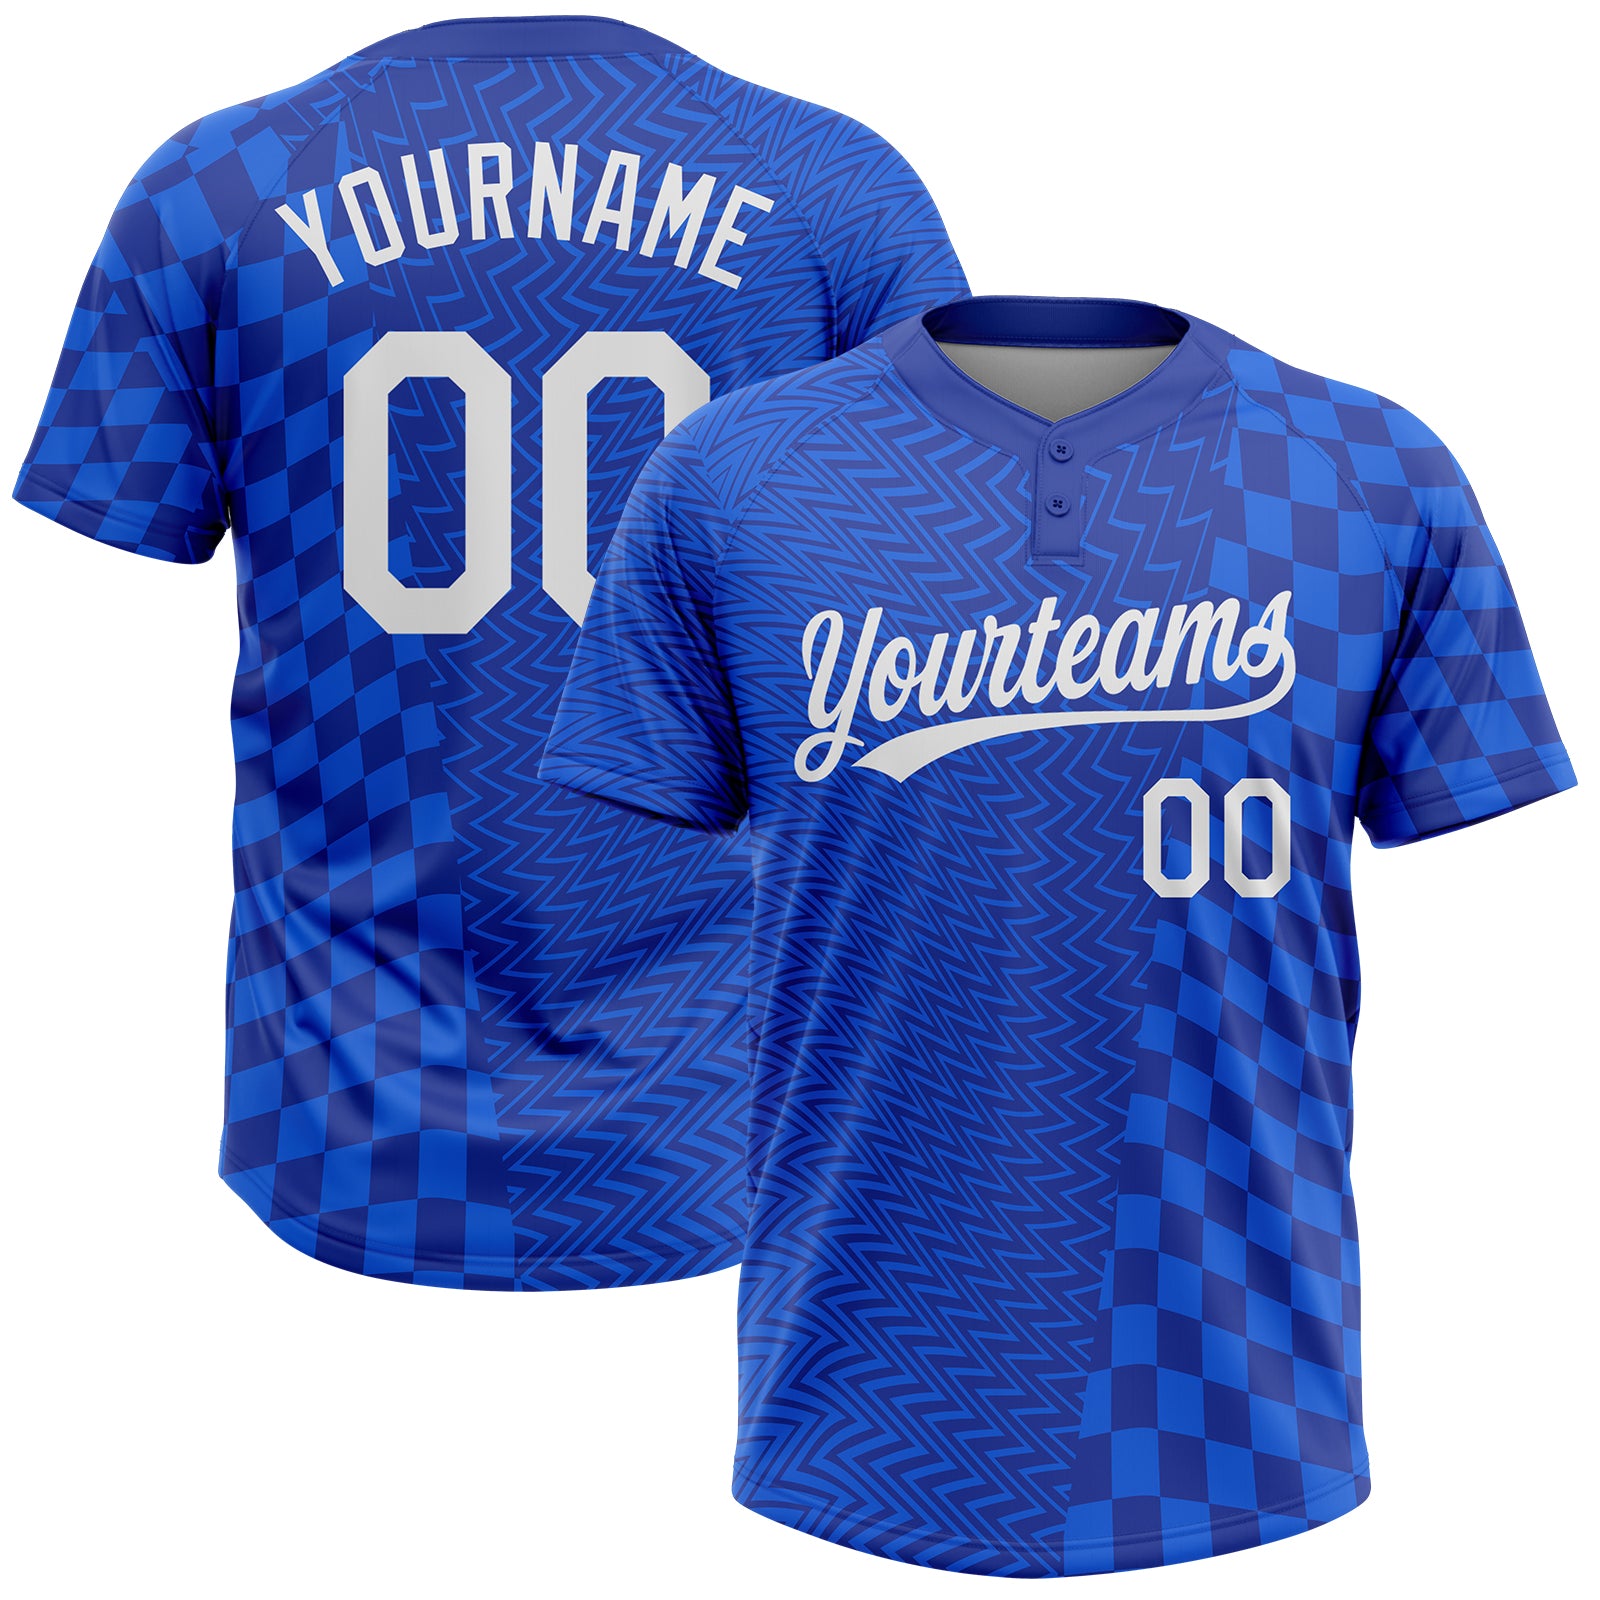 Chicago Cubs Personalized Baseball Jersey Shirt 115